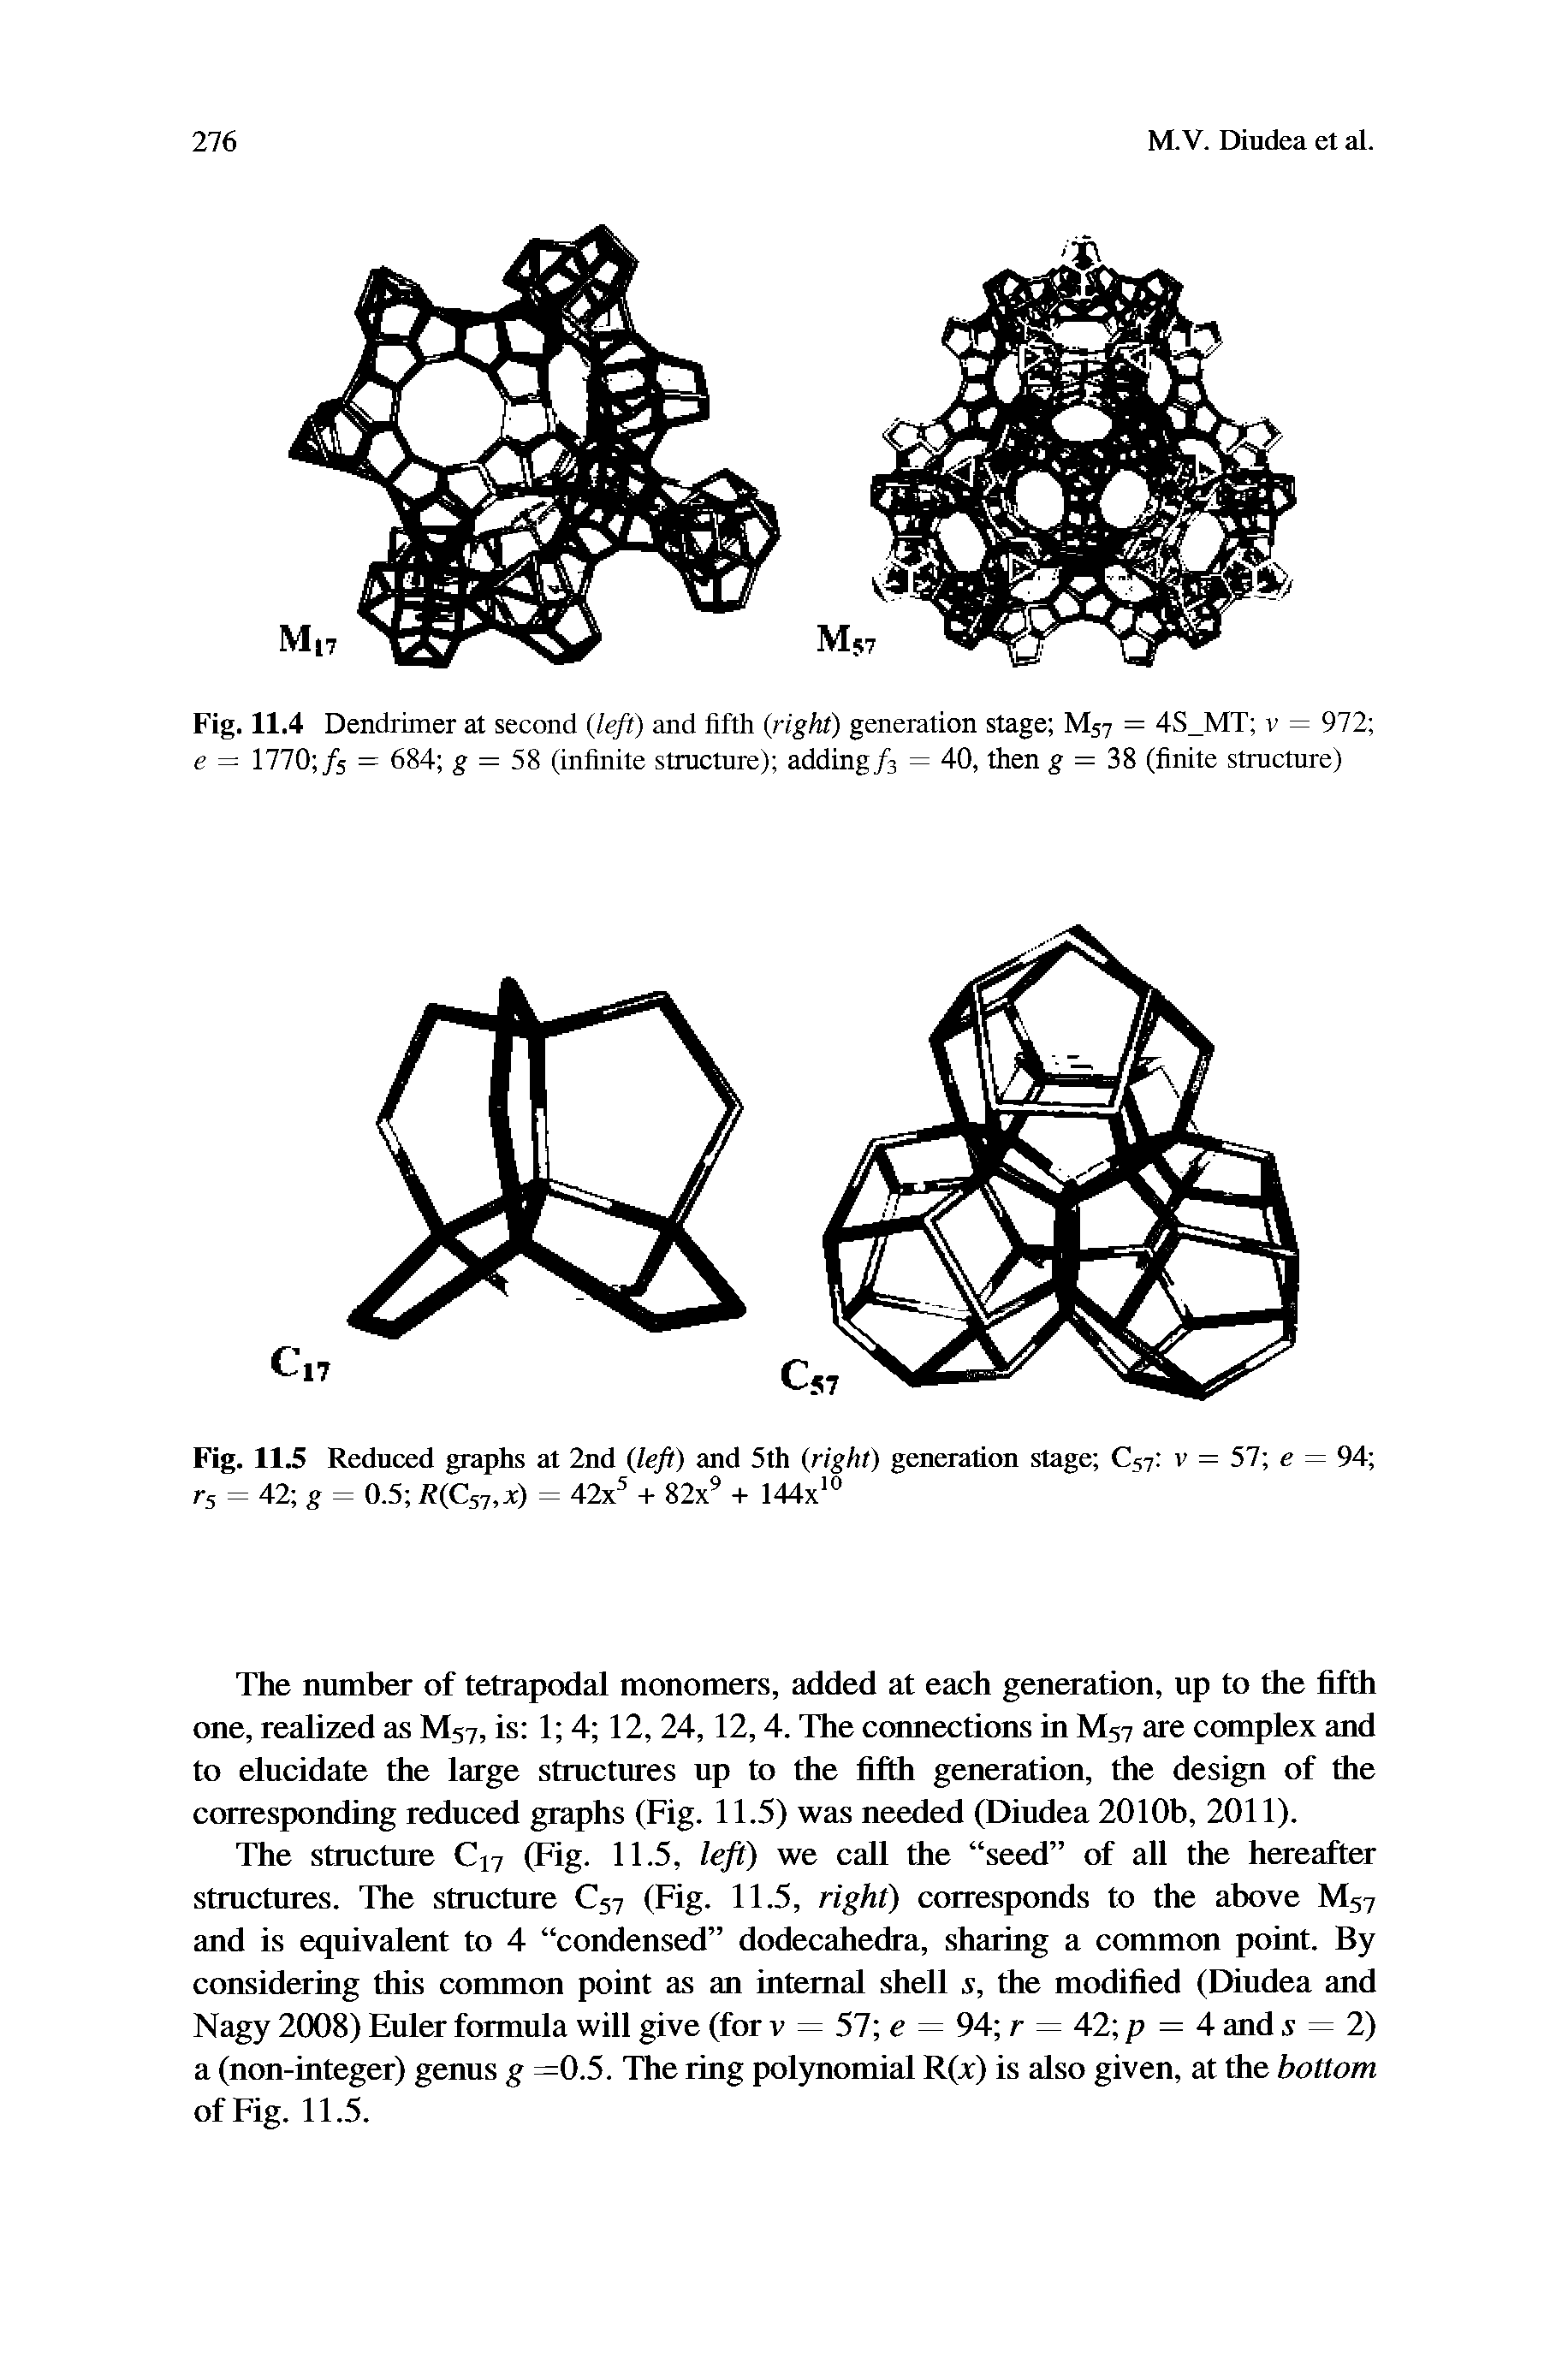 Fig. 11.4 Dendrimer at second left) and fifth (right) generation stage M57 = 4S MT v = 972 e = 1770 /s = 684 g = 58 (infinite structure) adding/3 = 40, then g = 38 (finite structure)...